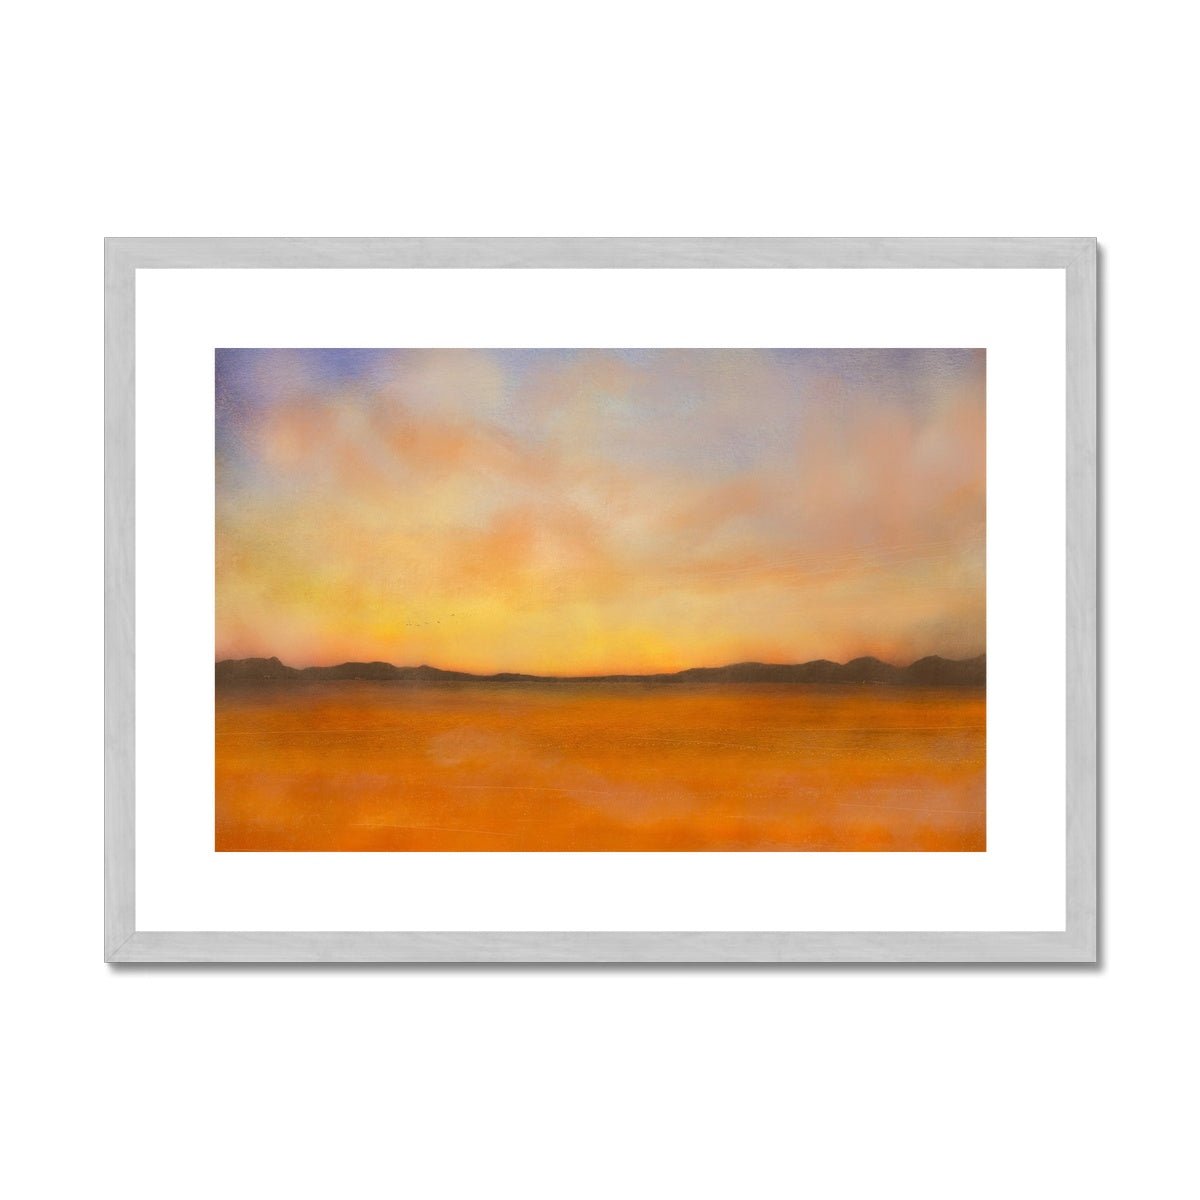 Islay Dawn Painting | Antique Framed & Mounted Prints From Scotland-Antique Framed & Mounted Prints-Hebridean Islands Art Gallery-A2 Landscape-Silver Frame-Paintings, Prints, Homeware, Art Gifts From Scotland By Scottish Artist Kevin Hunter